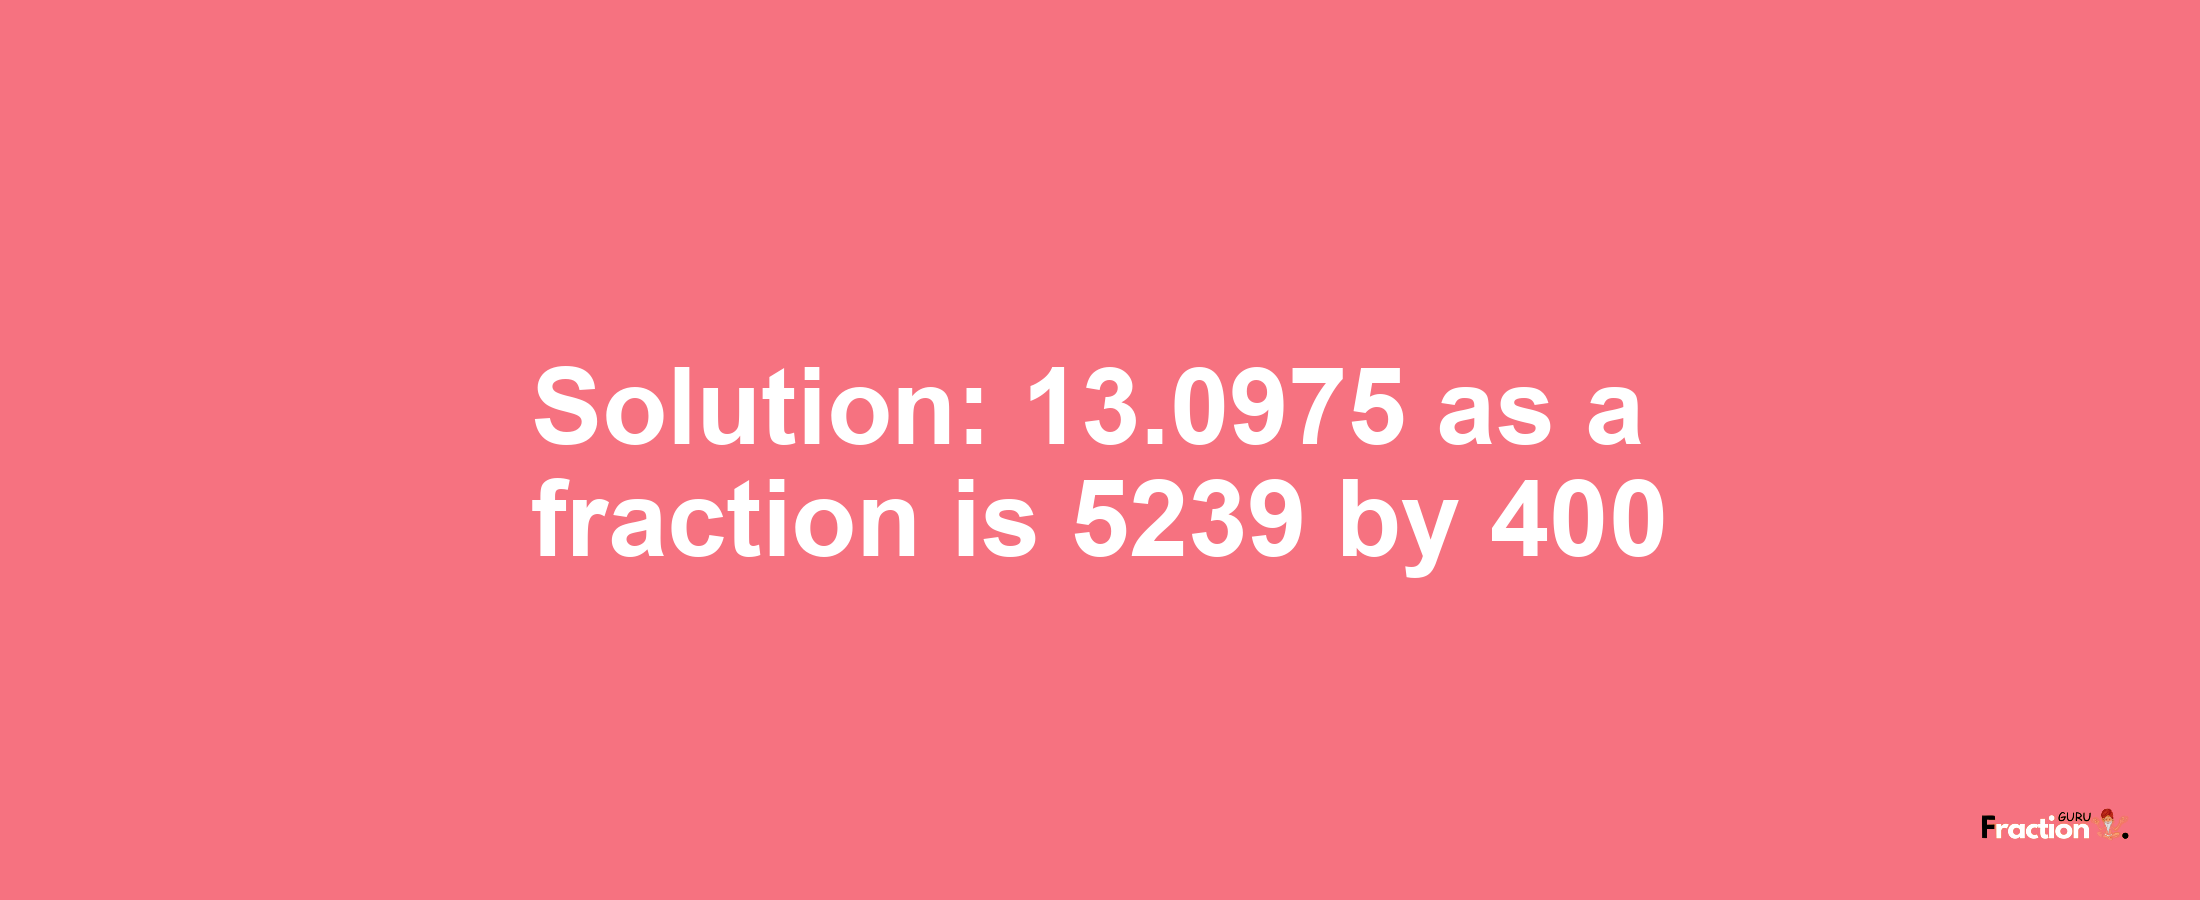 Solution:13.0975 as a fraction is 5239/400